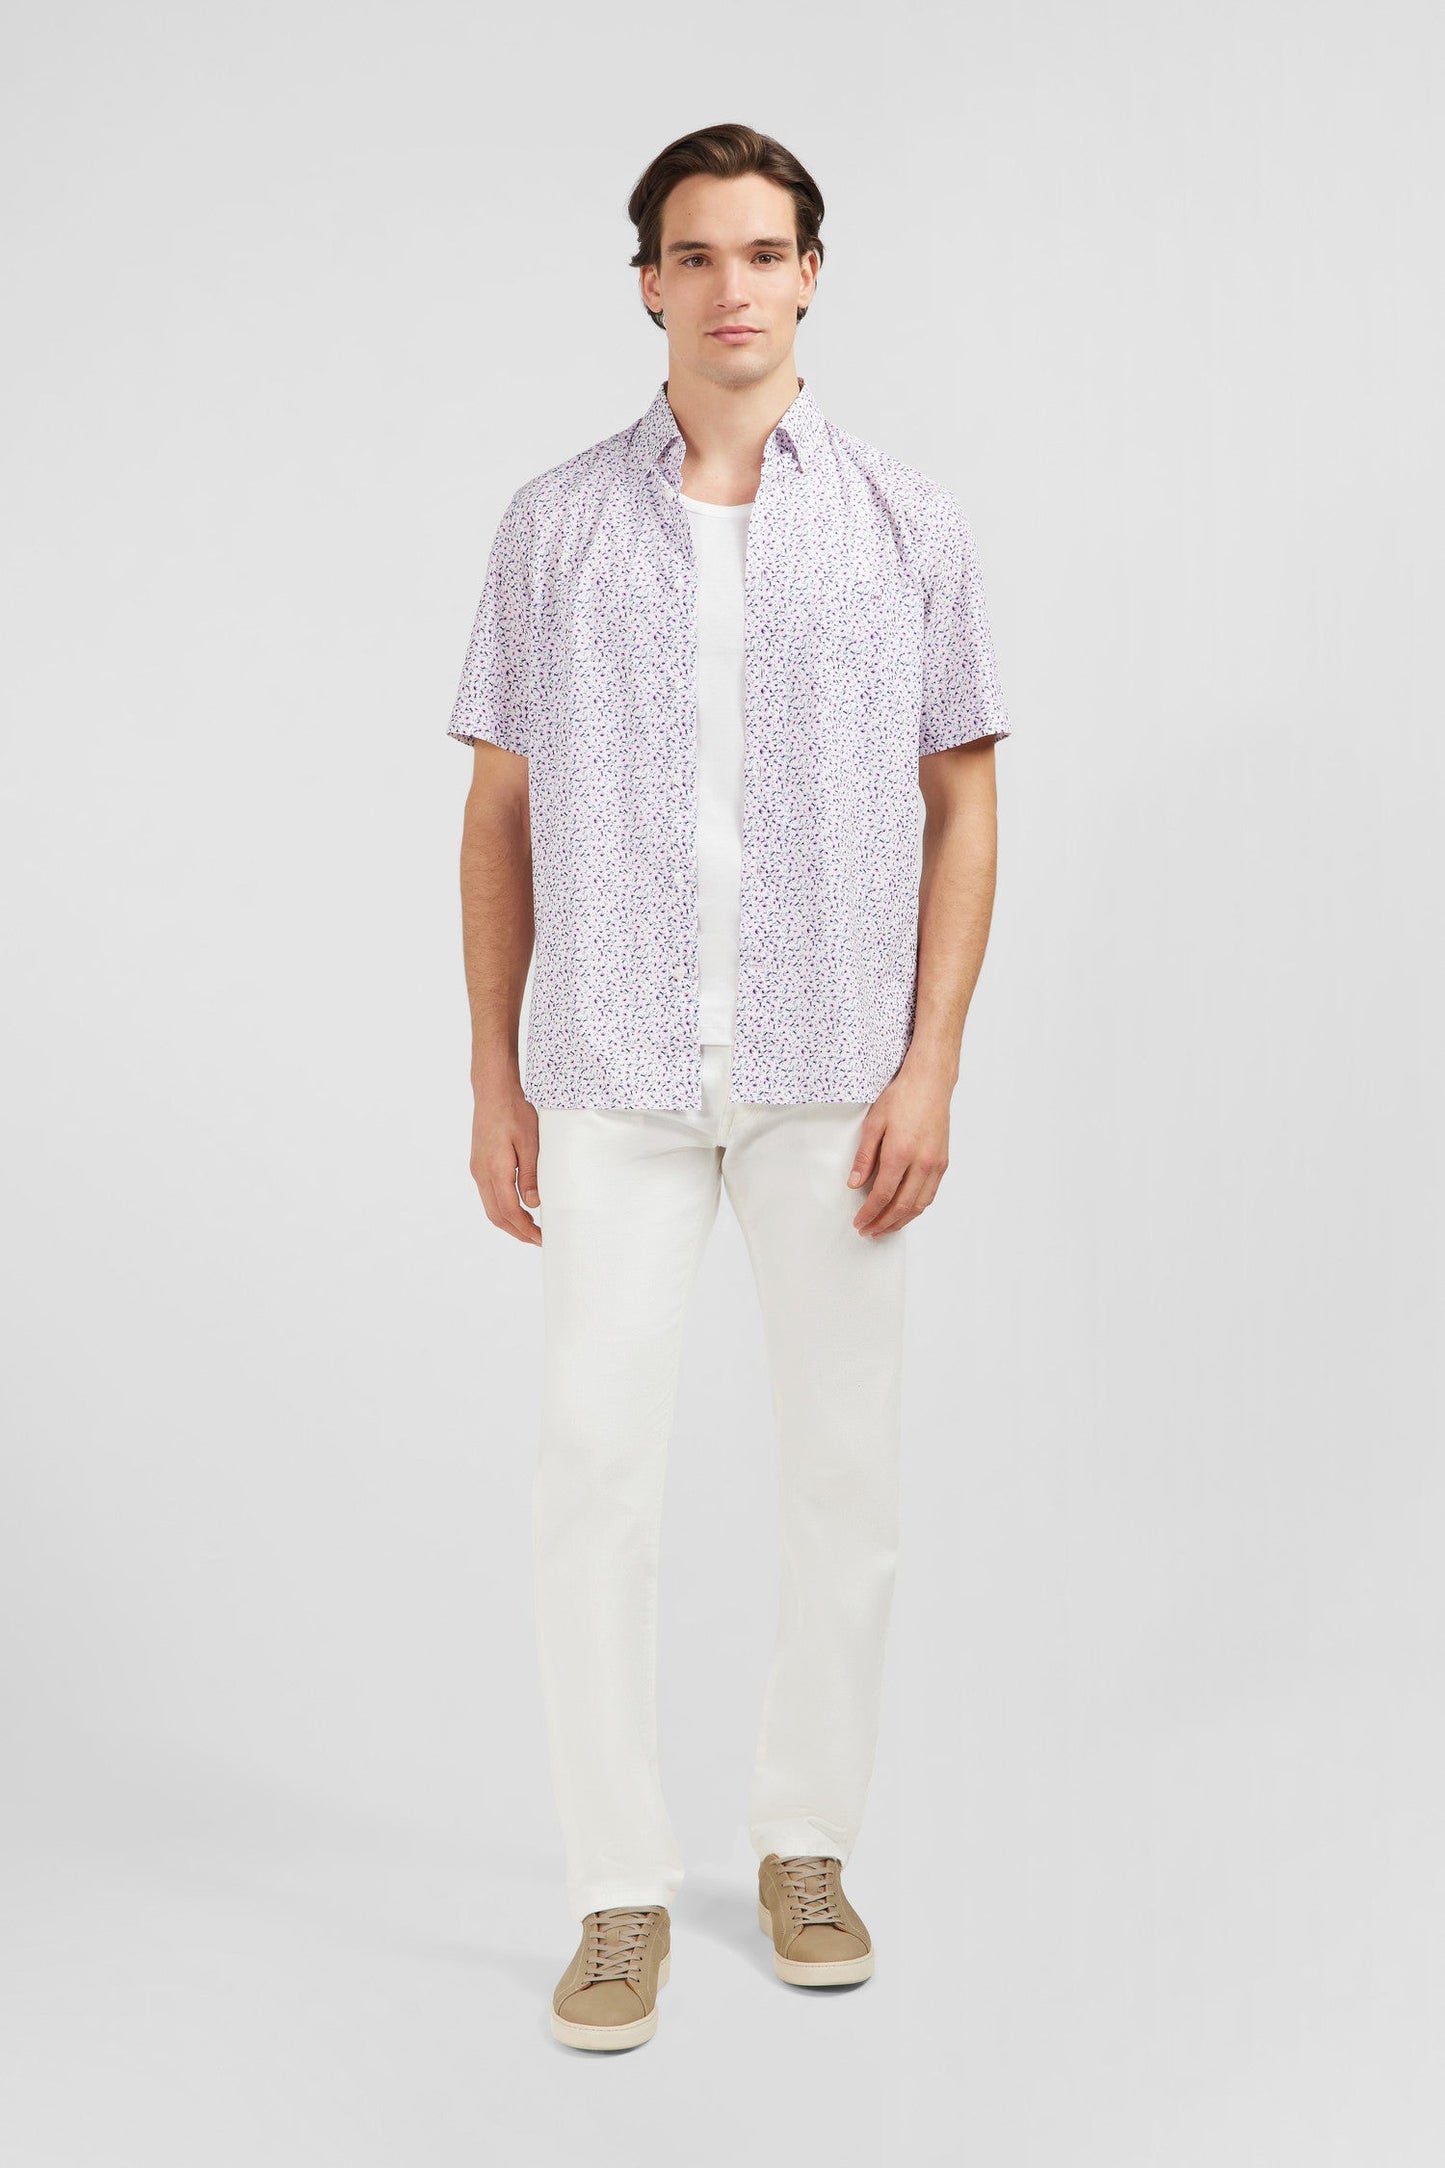 White shirt with exclusive floral print - Image 1